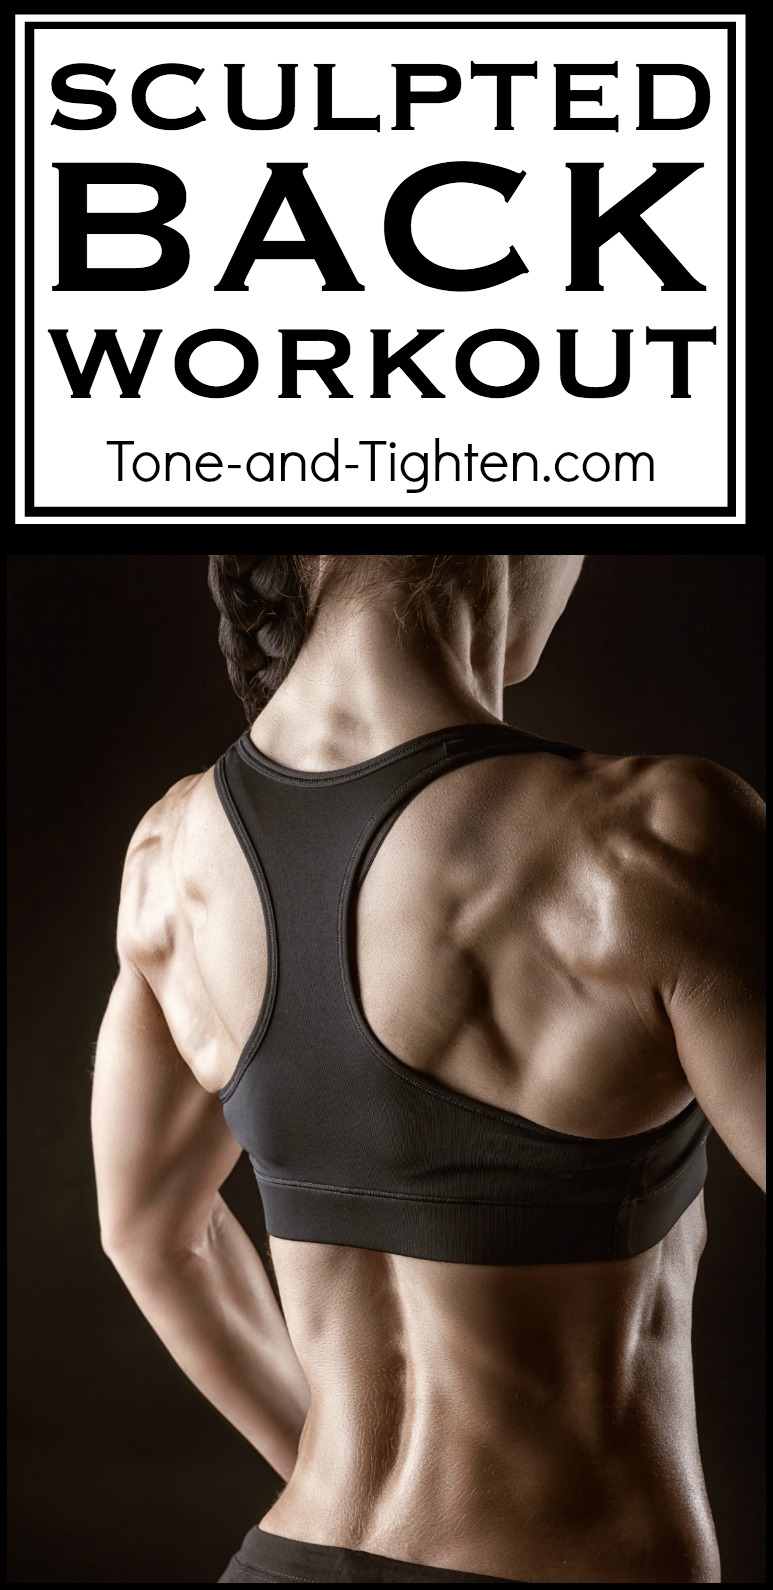 Best Back Workout For Definition | Tone and Tighten